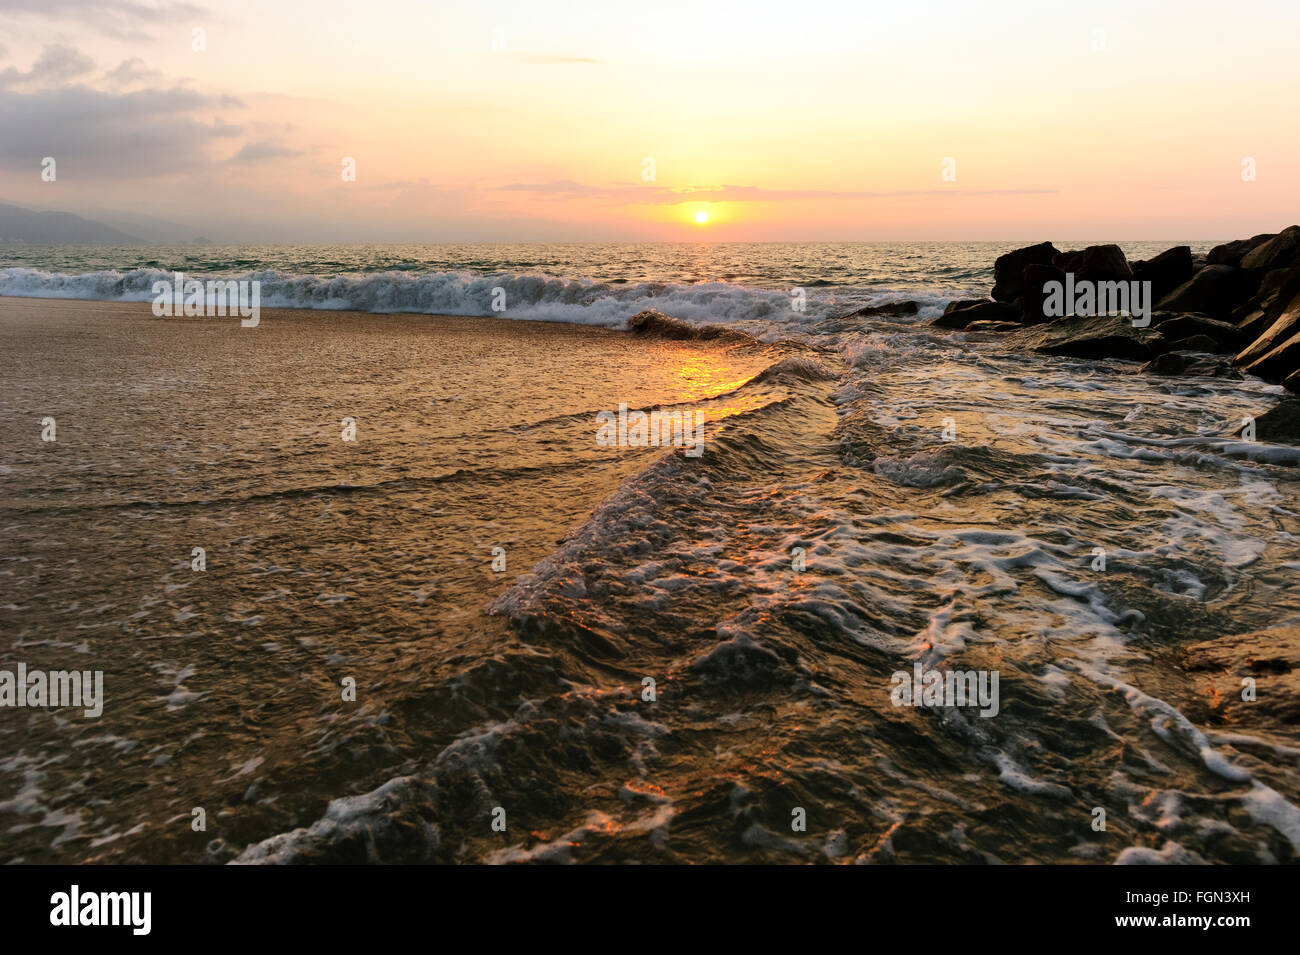 Seascape sunset is a sunset on the beach with large rocks in the foreground and a warm setting sunset sky on the ocean horizon. Stock Photo